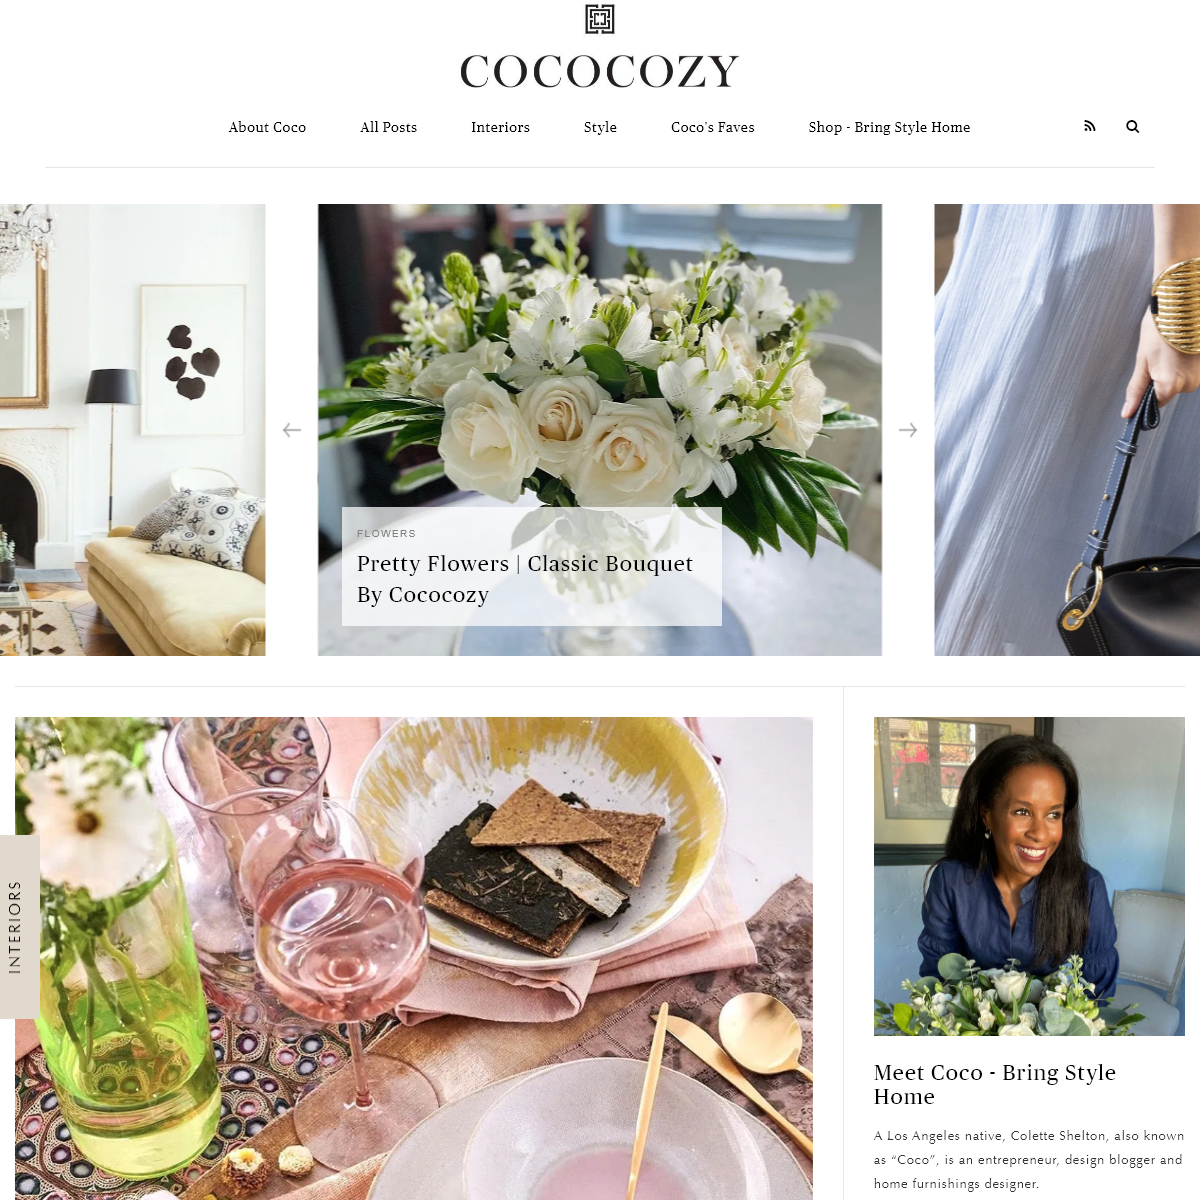 A complete backup of cococozy.com